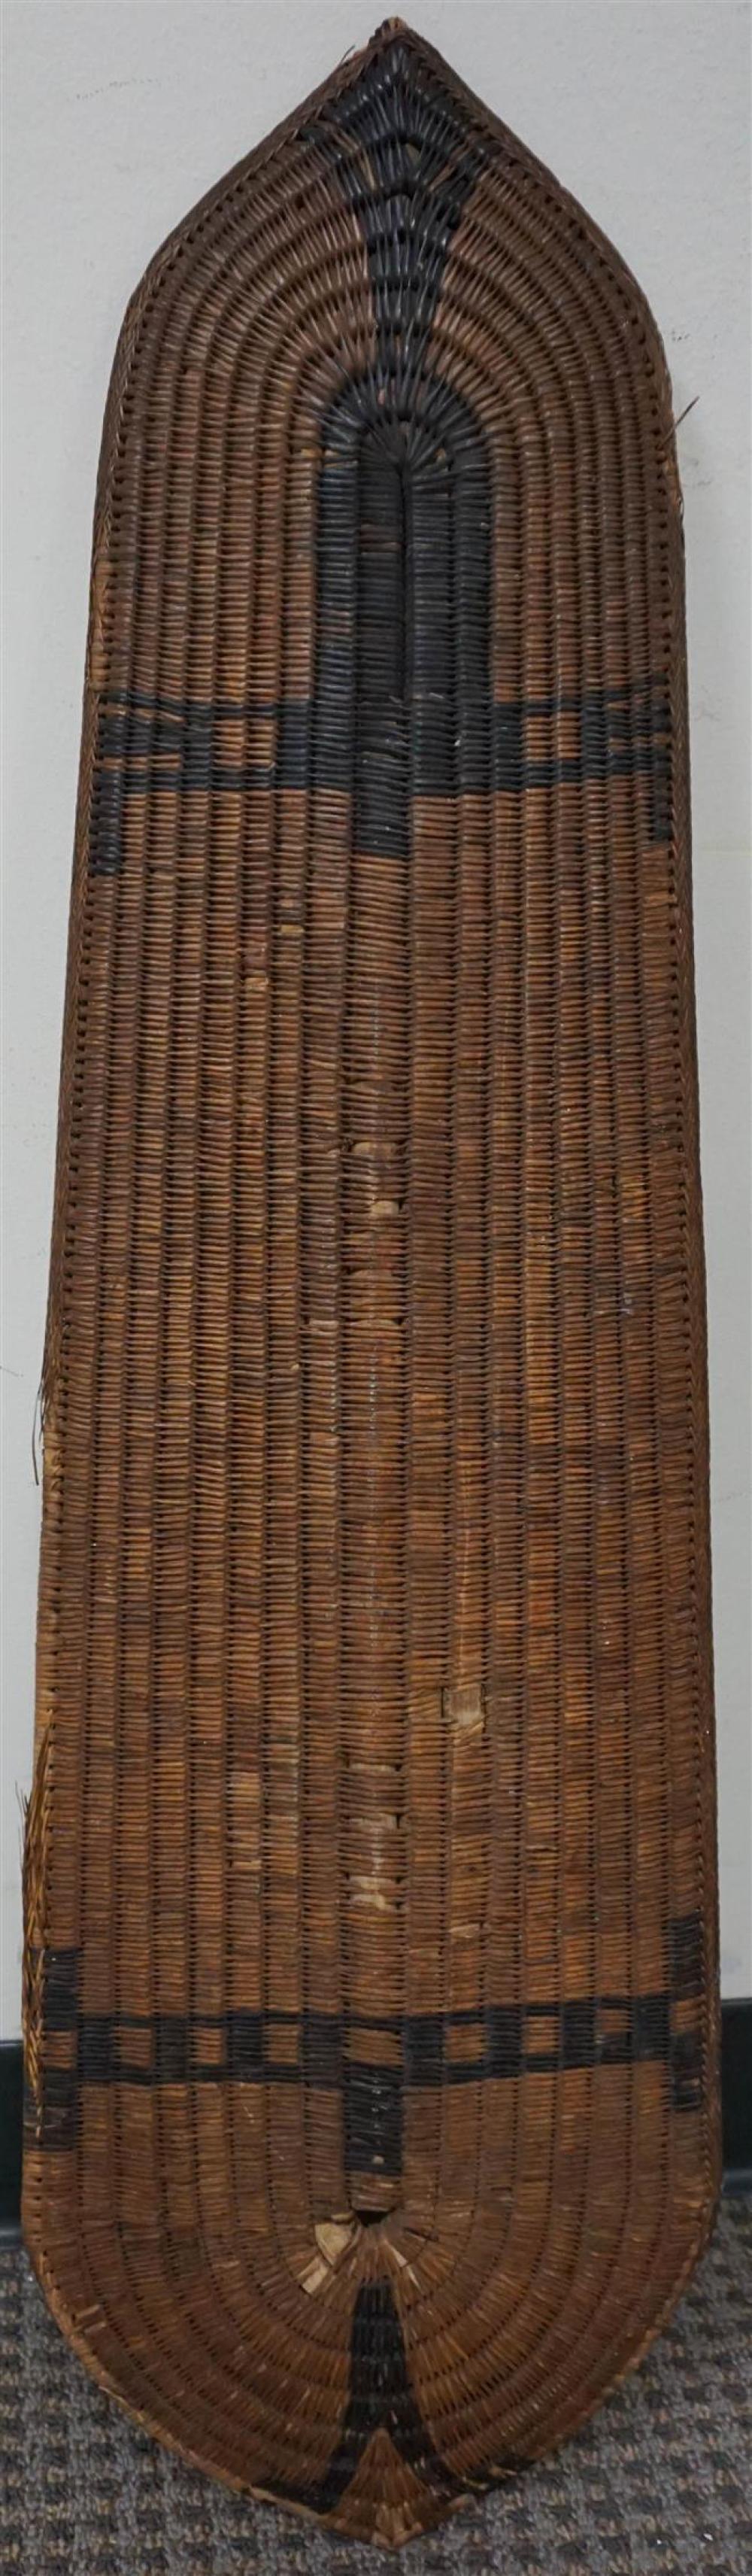 NATIVE AMERICAN INDIAN WOVEN BASKETRY 324d48